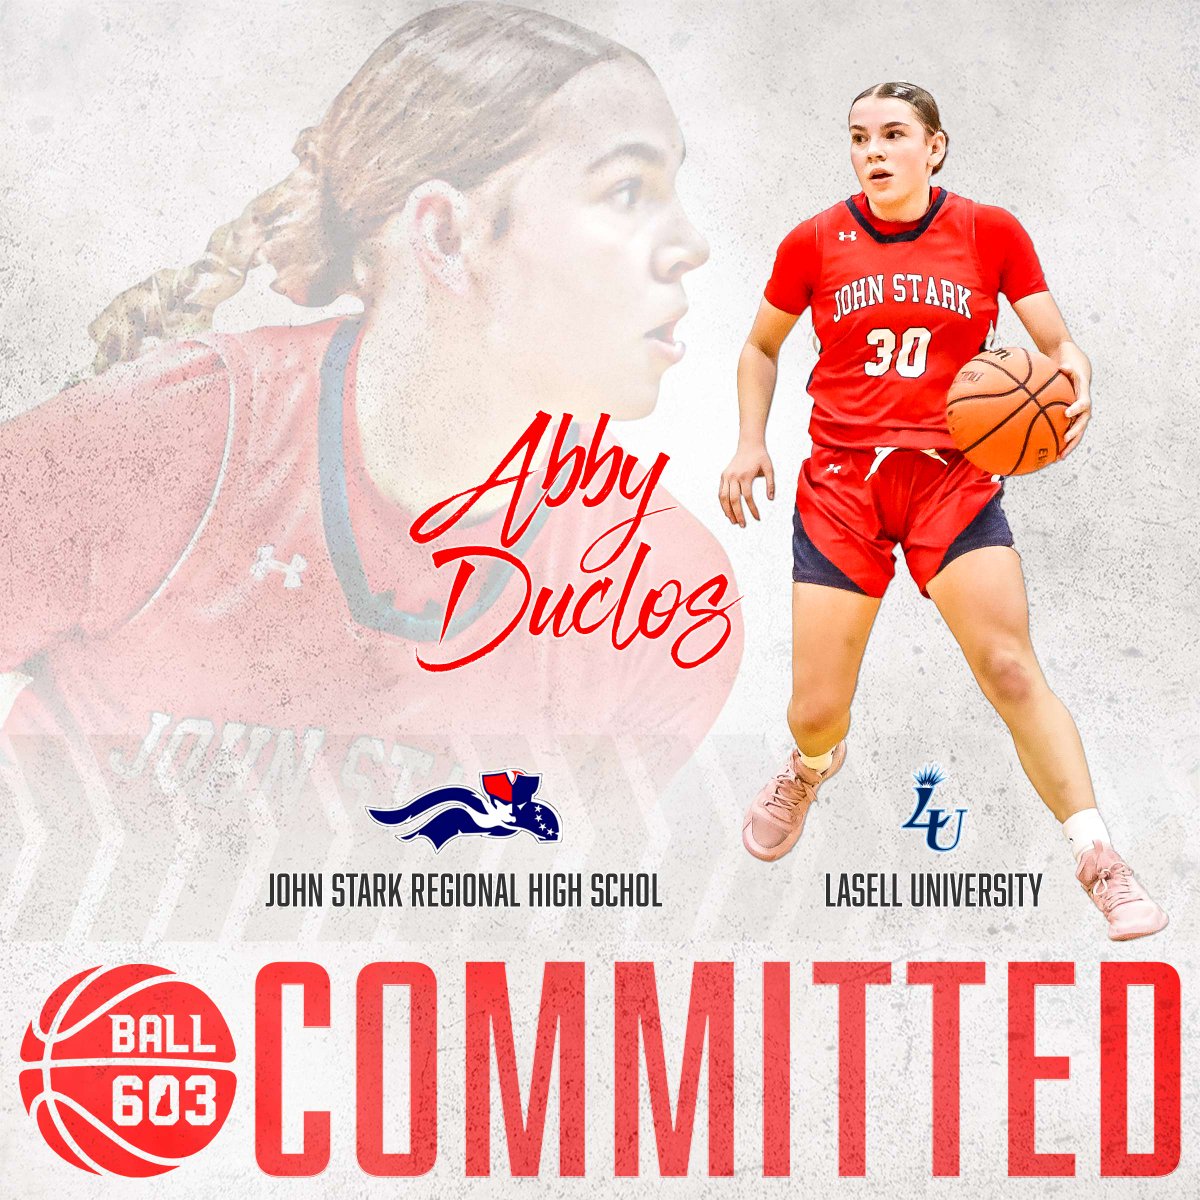 Upon graduating from John Stark this spring, Abby Duclos will continue her playing career at Lasell University in Newton, Mass. Abby plans to major in Health Science while playing for the D-III Lasers. Best of luck Abby! #Ball603committed @LasellWBB 📸 Jill Stevens